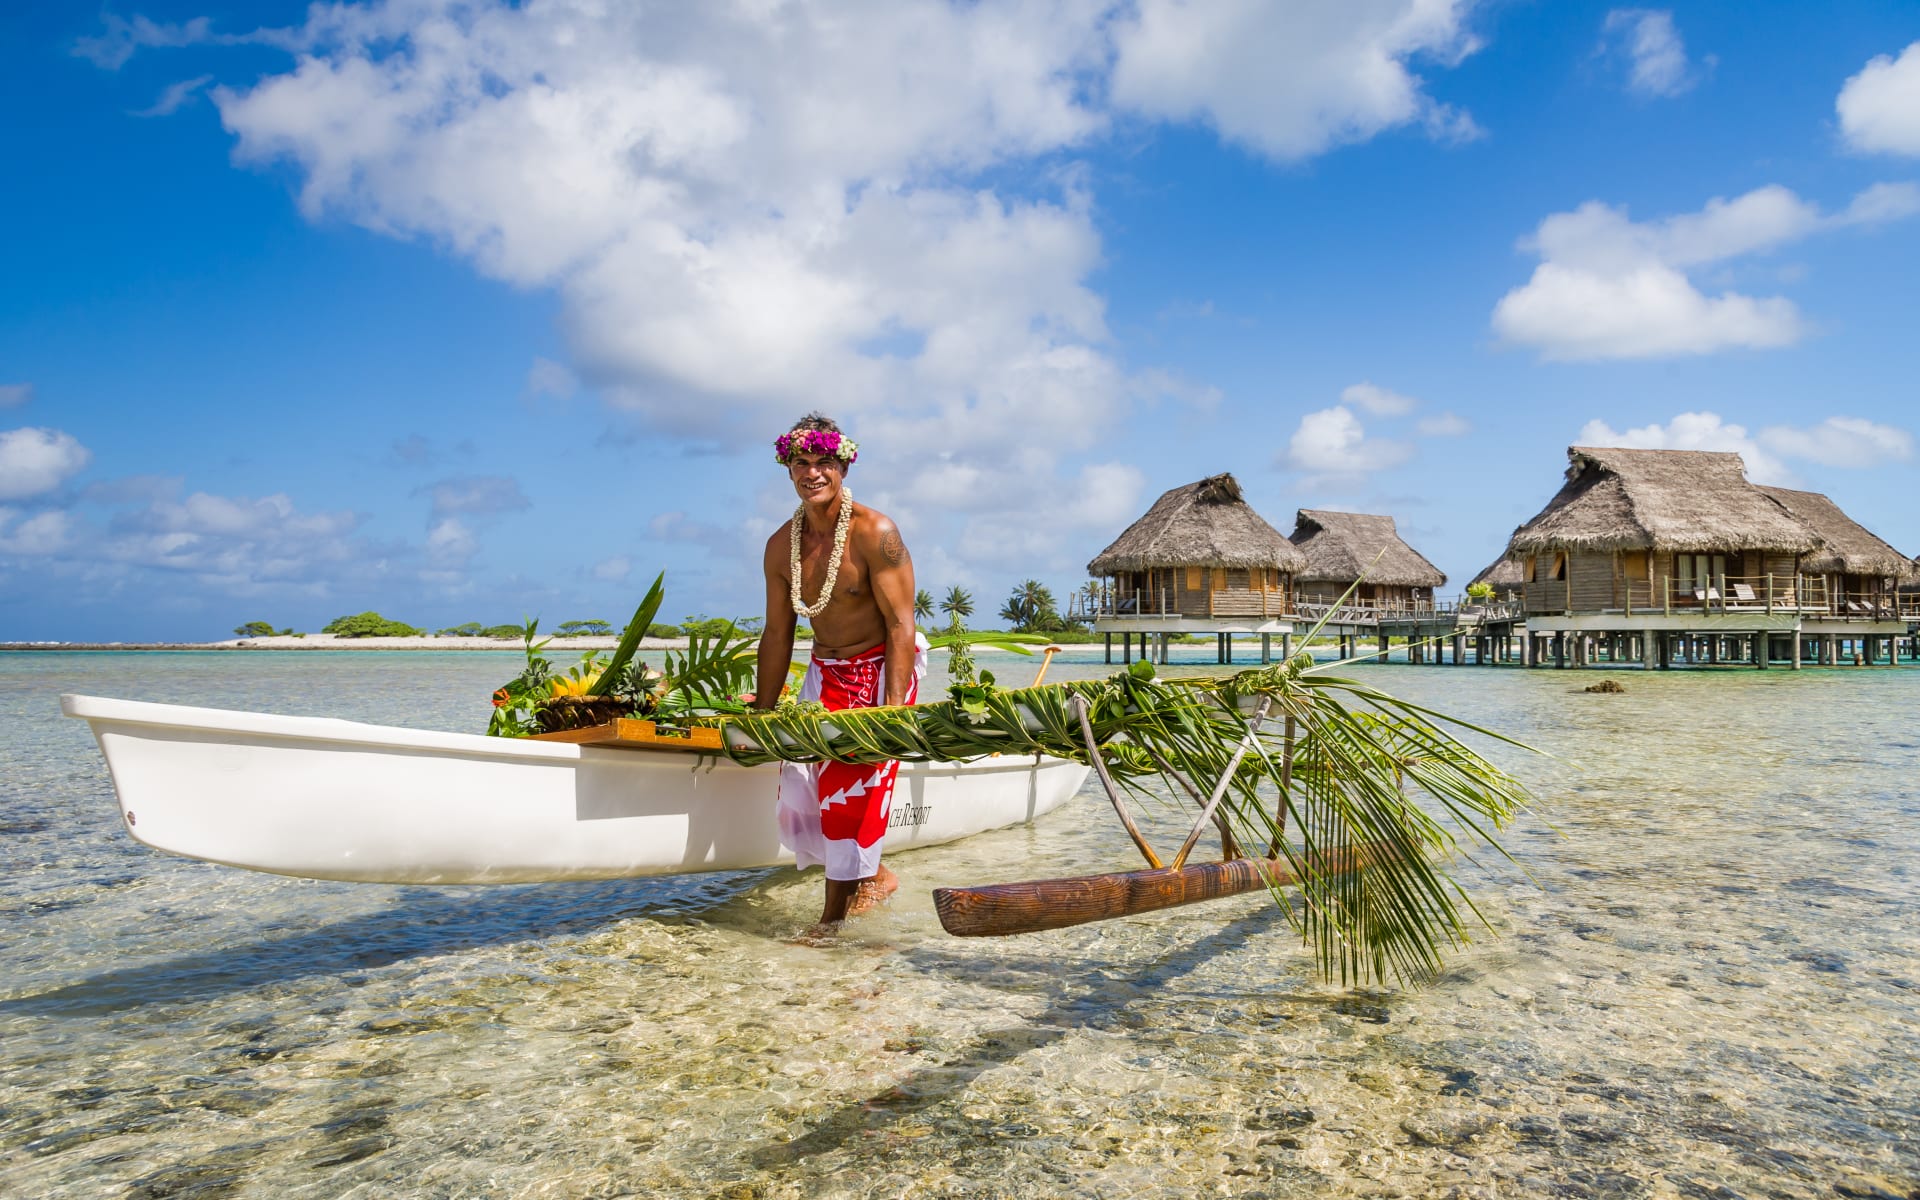 Local Tahitian man was canoeing for food delivery in Tikehau island resort in French Polynesia.